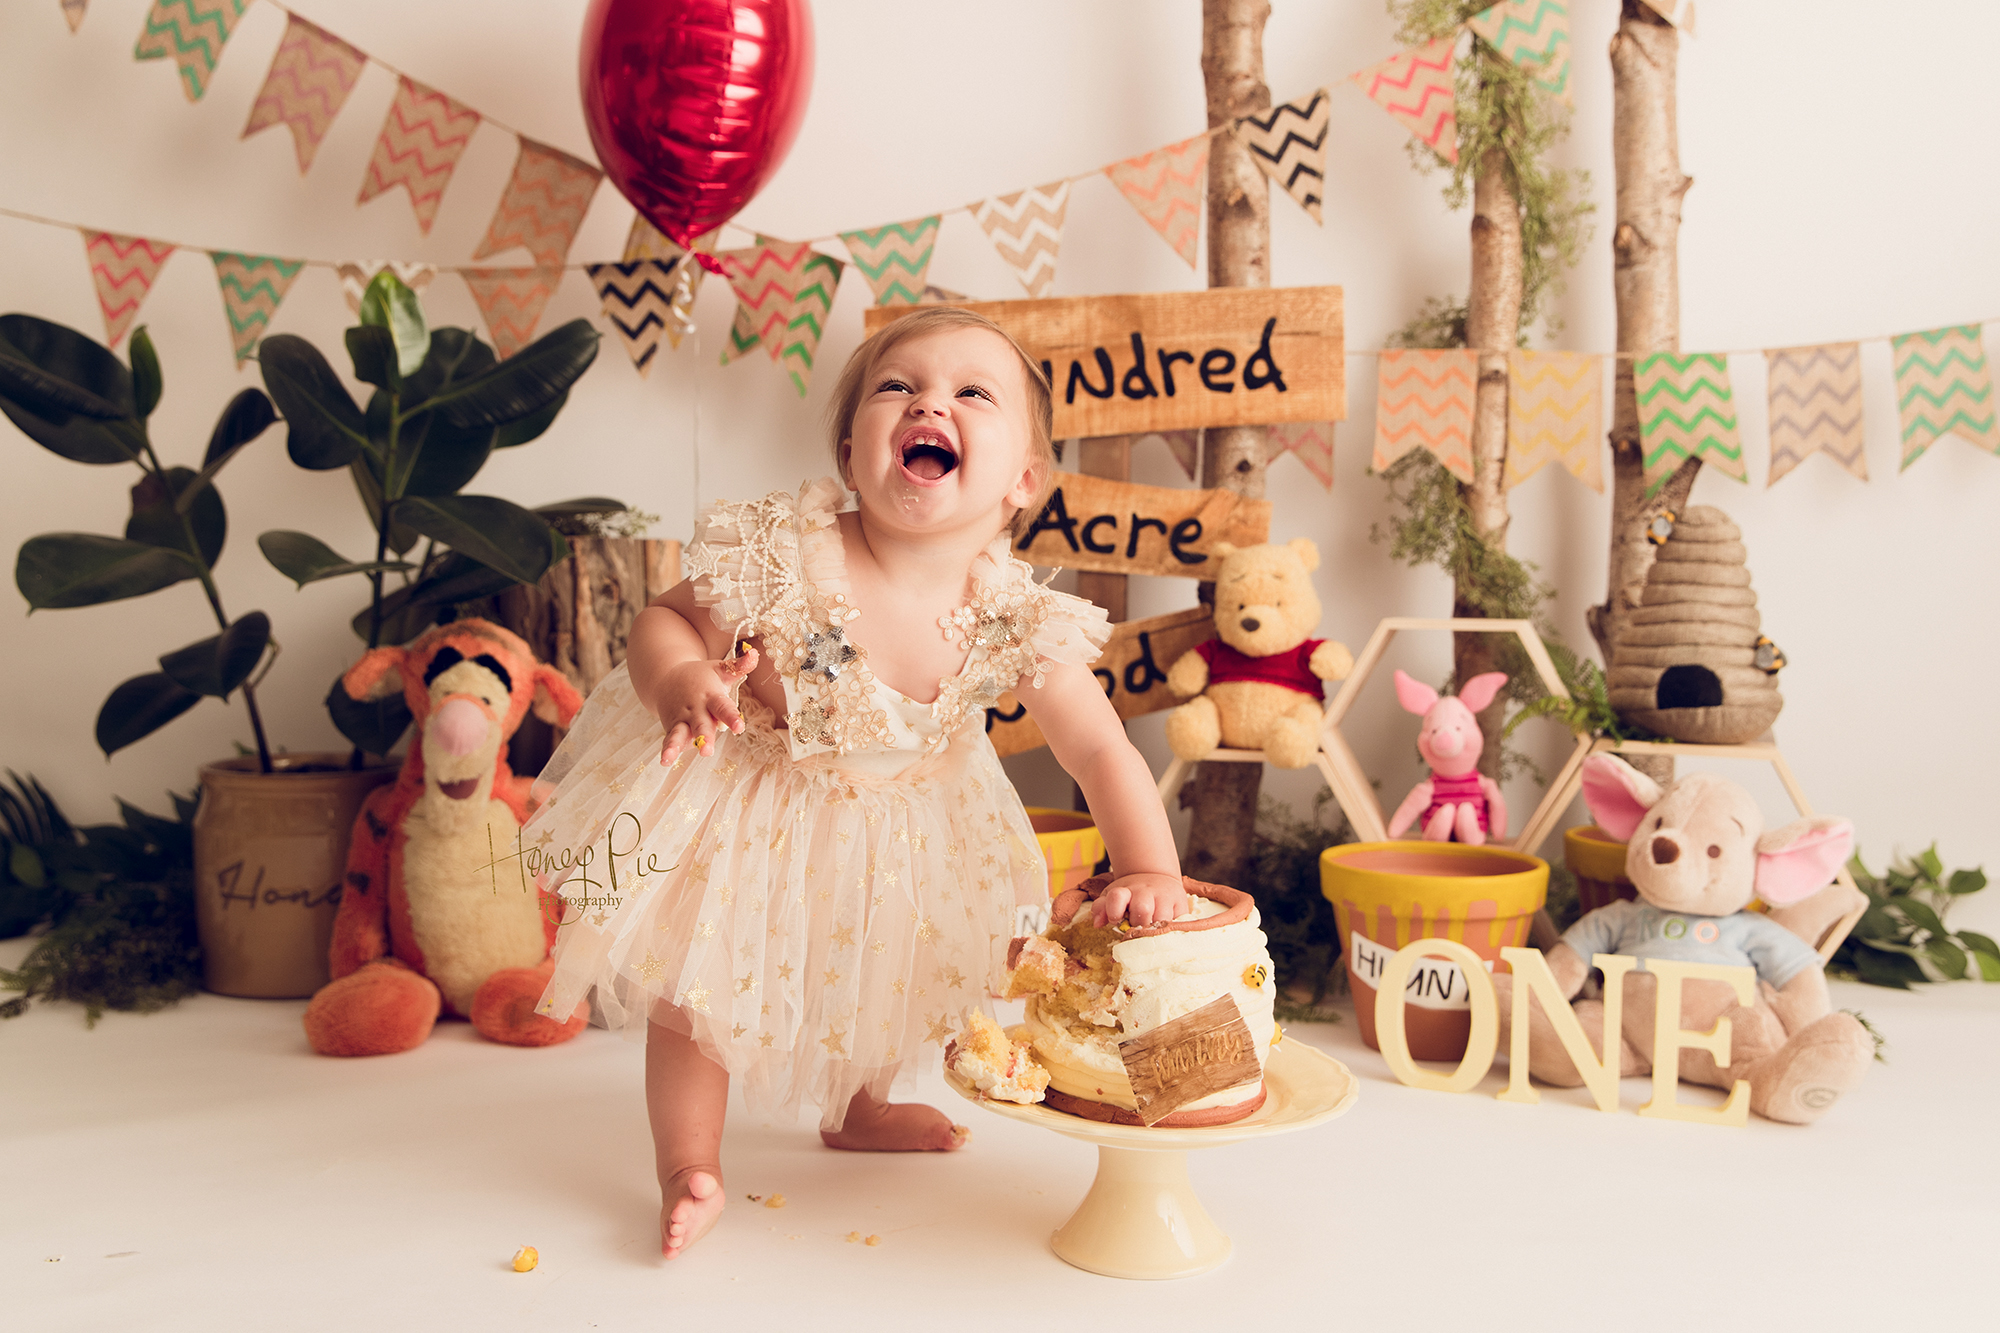 Baby in party dress smashing her Winnie The Pooh themed birthday cake